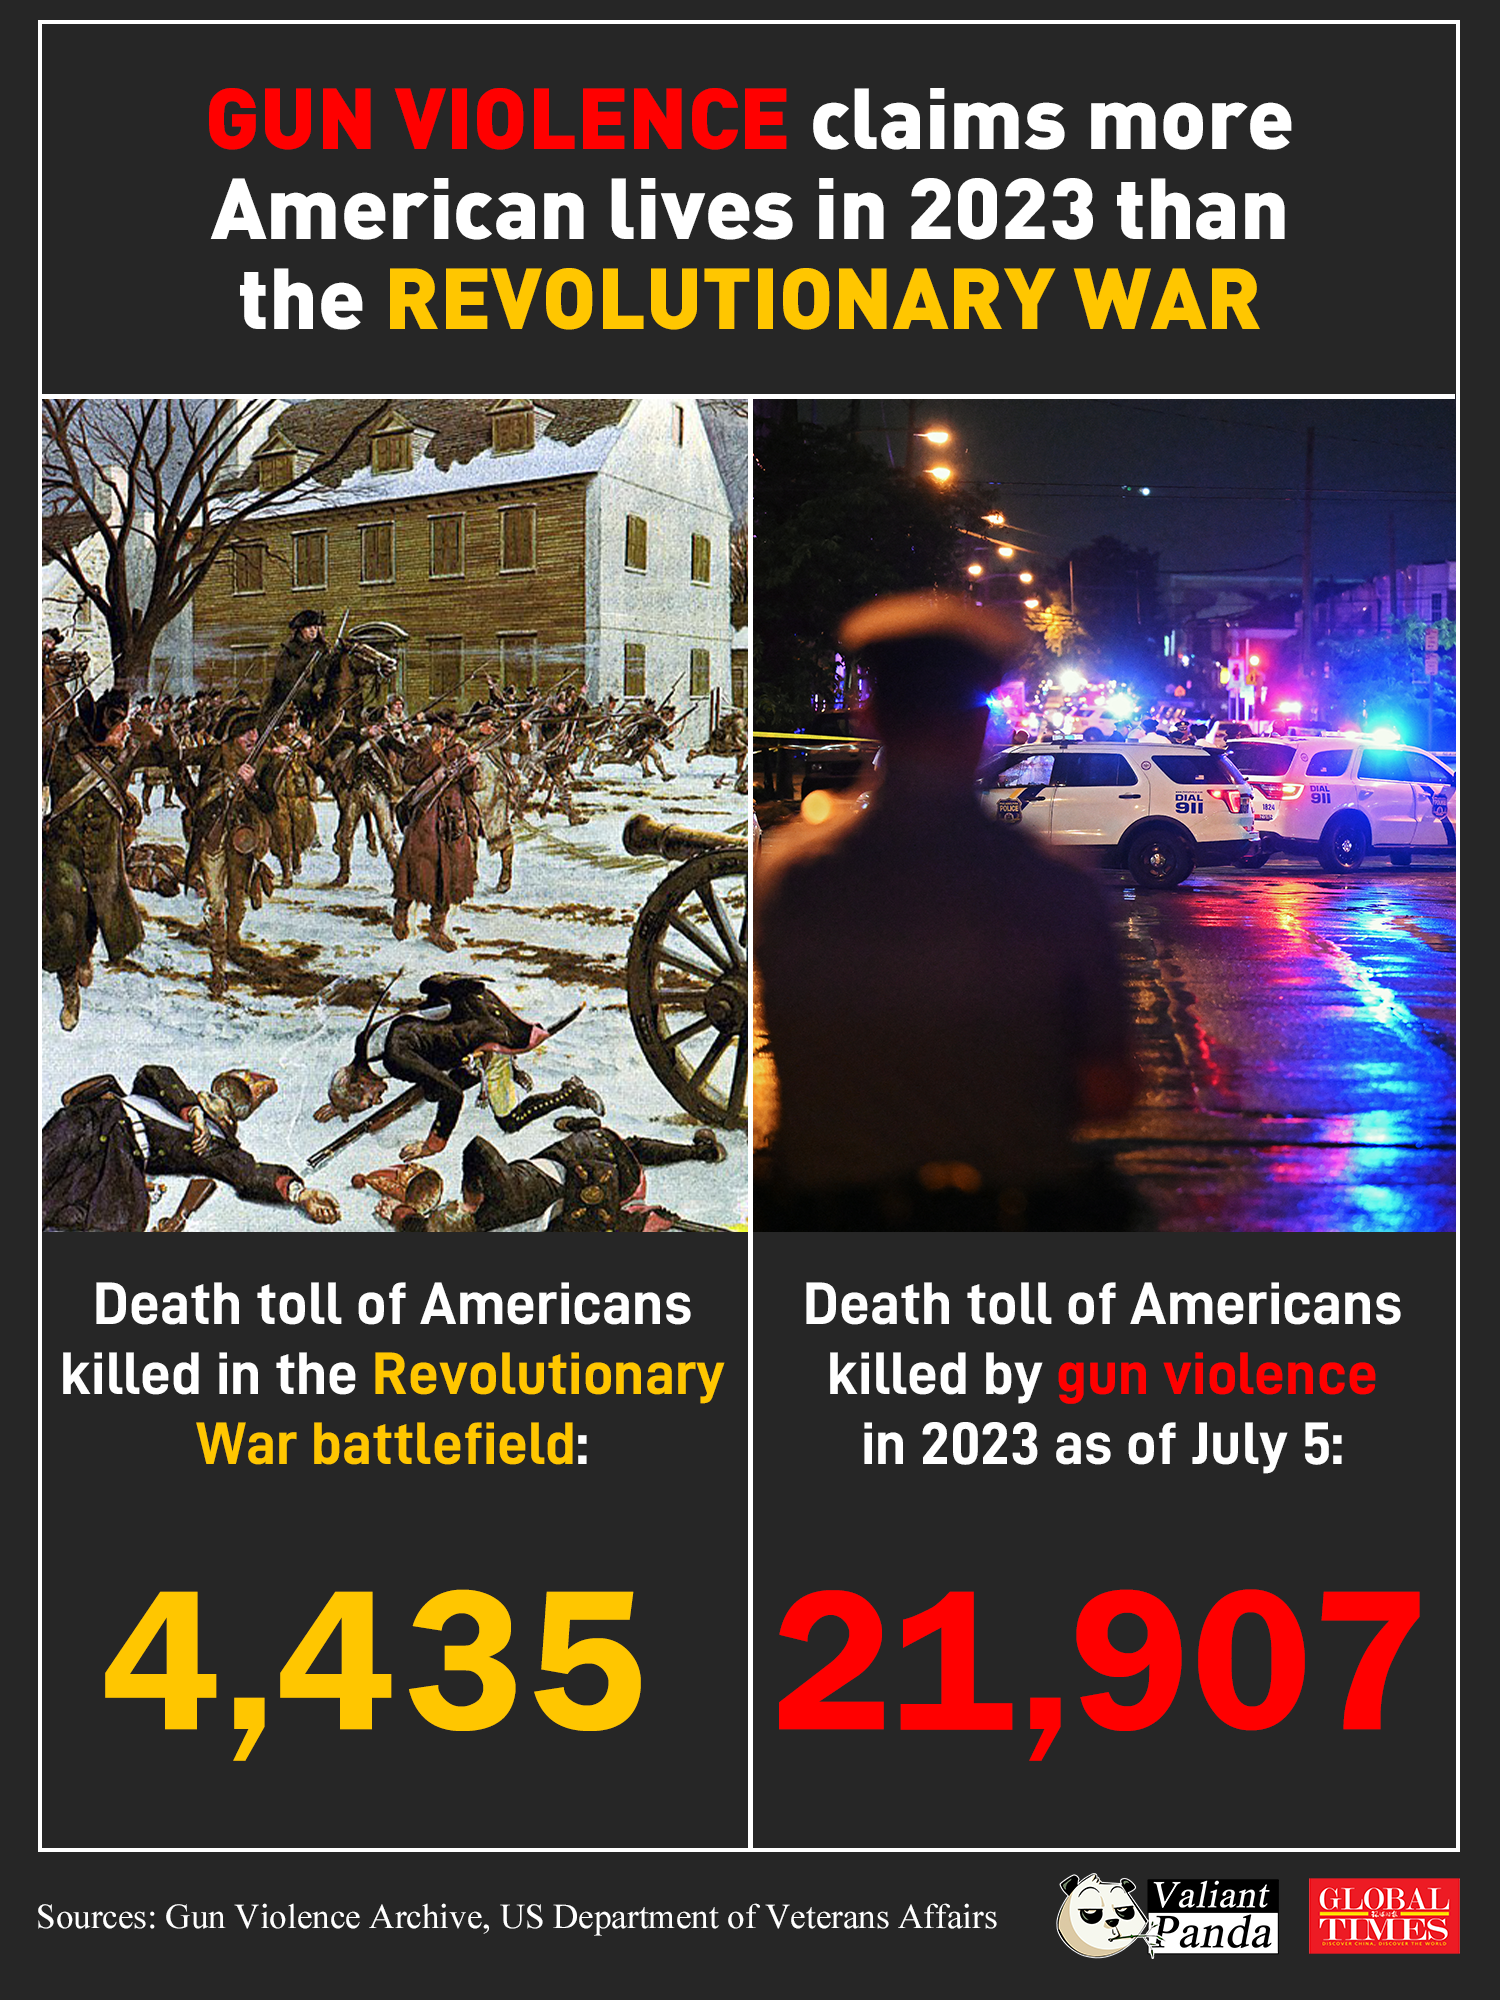 This year's July 4th is once again overshadowed by mass shootings. Gun Violence has so far claimed more American lives in 2023 than the Revolutionary War.